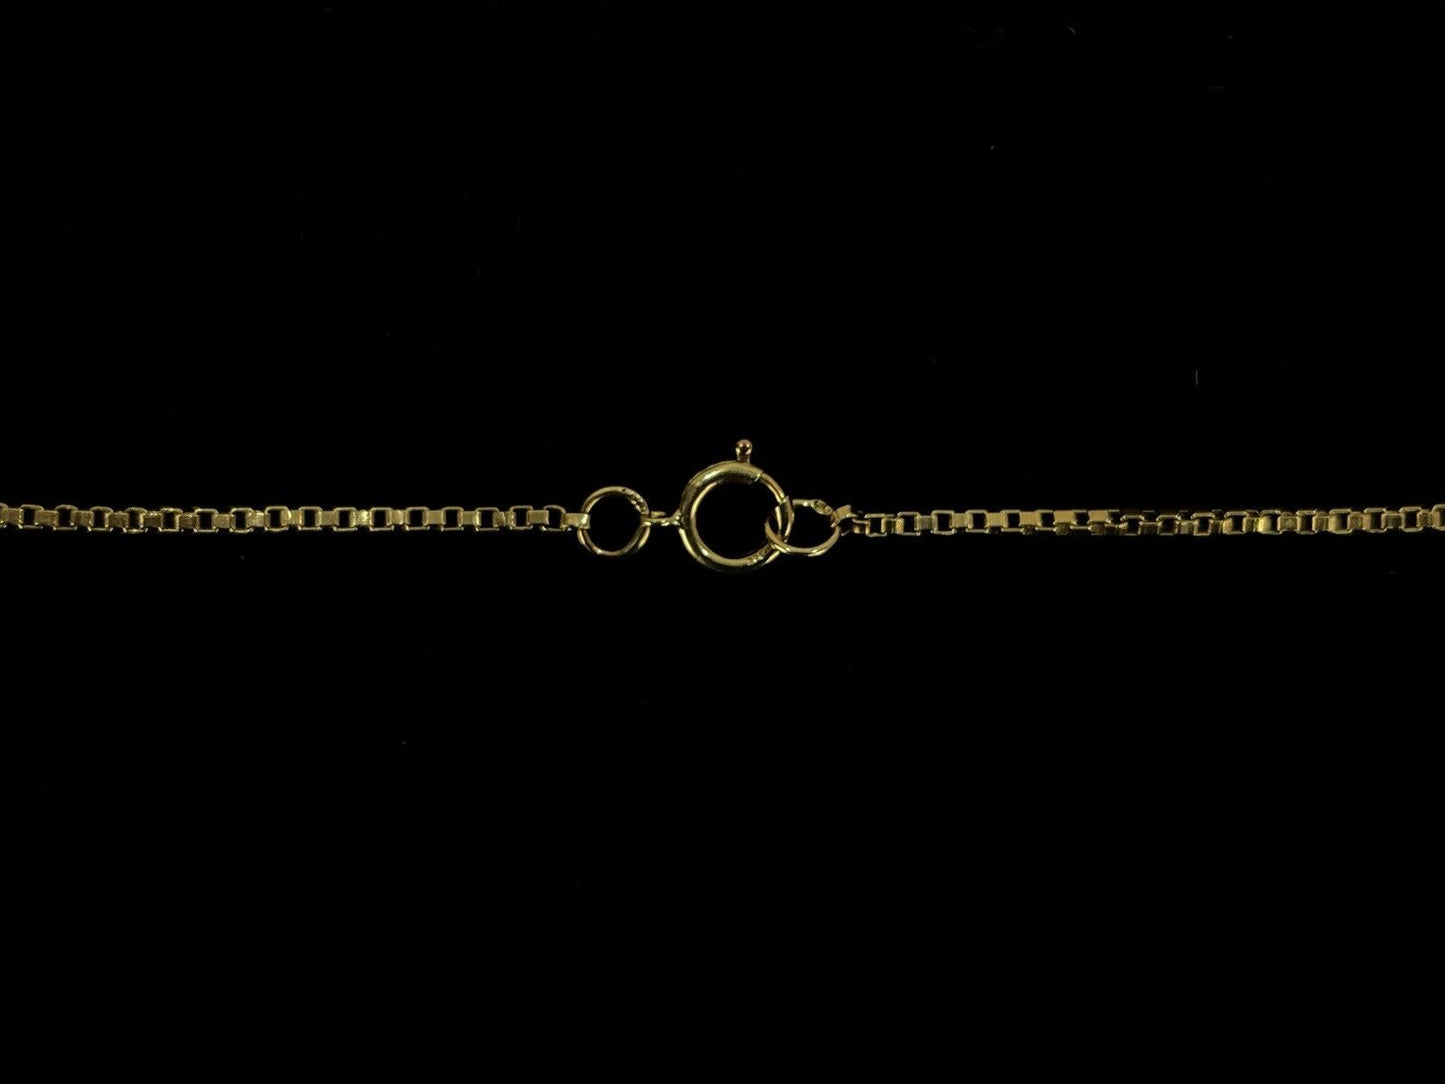 9ct Yellow Gold, Box Chain Necklace with Rose Pendant - 24.5”, 9.5g